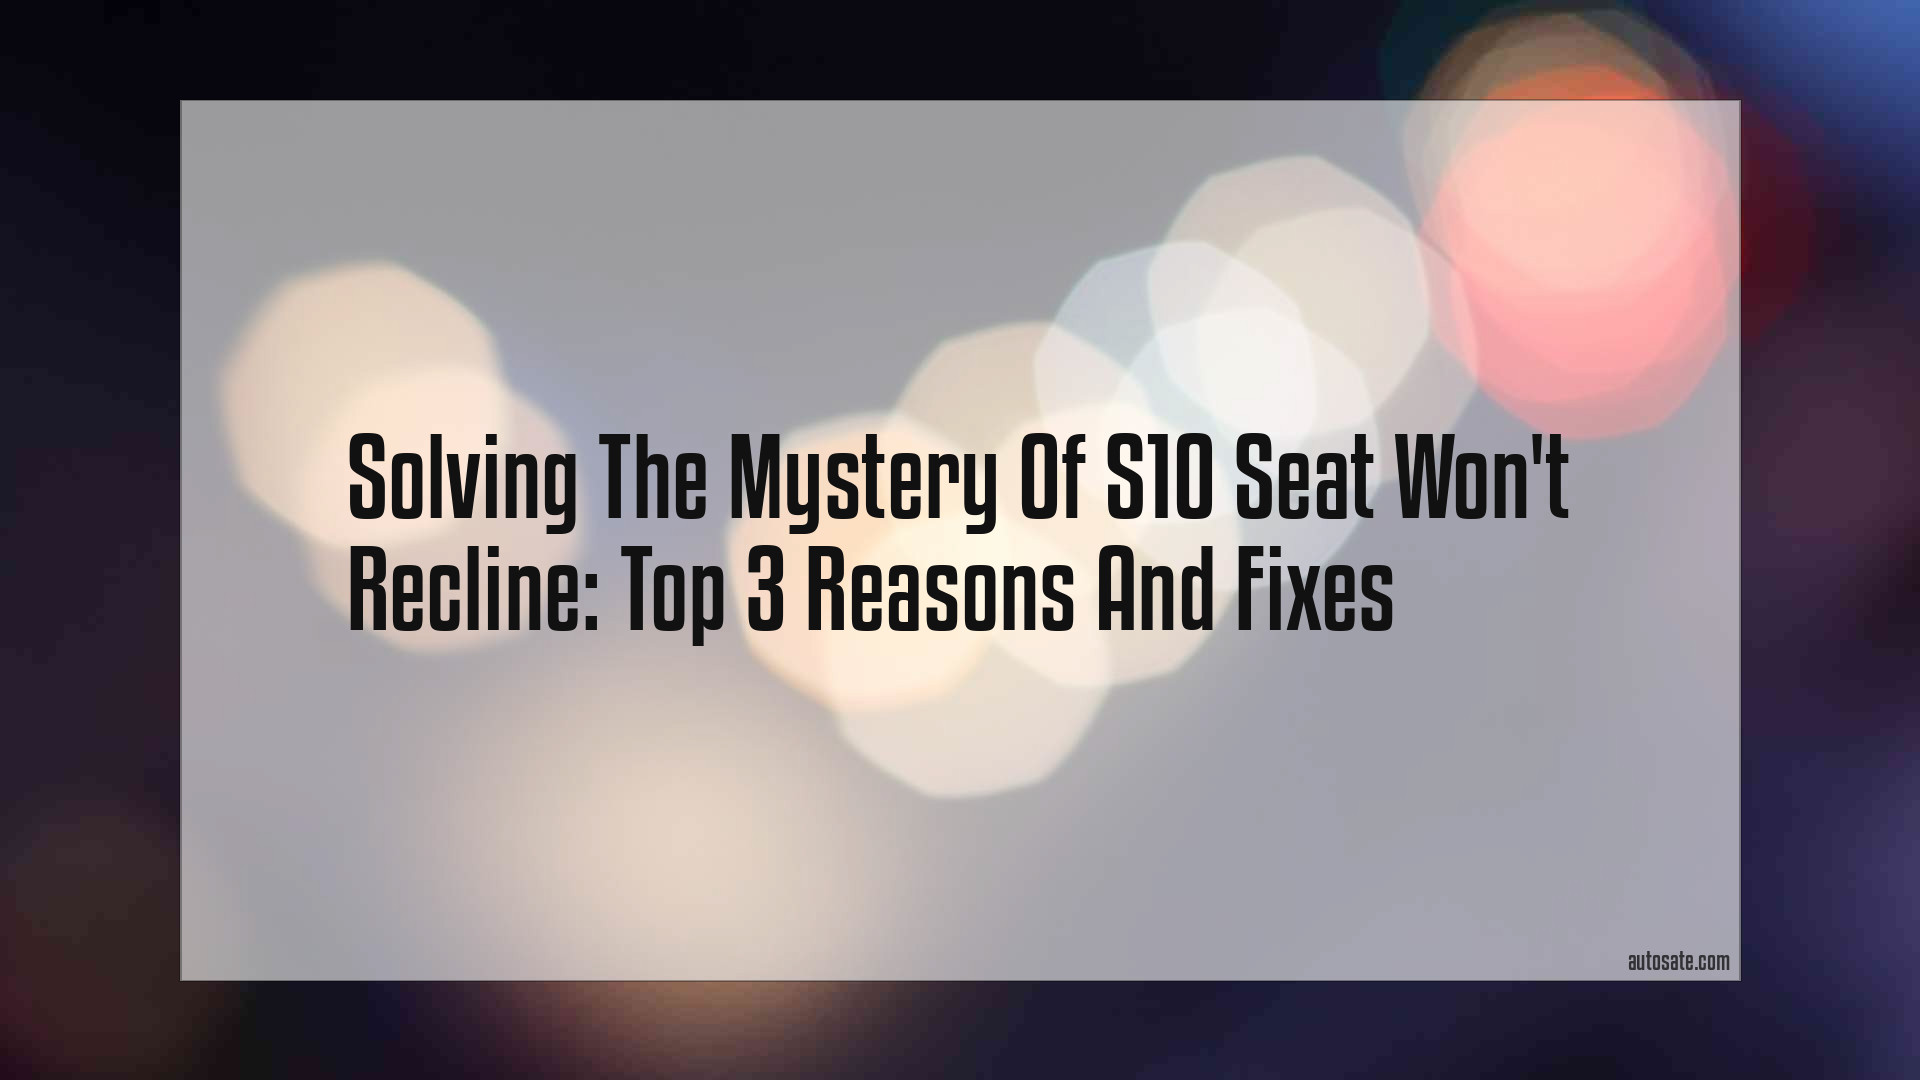 Solving The Mystery Of S10 Seat Won&#8217;t Recline: Top 3 Reasons And Fixes